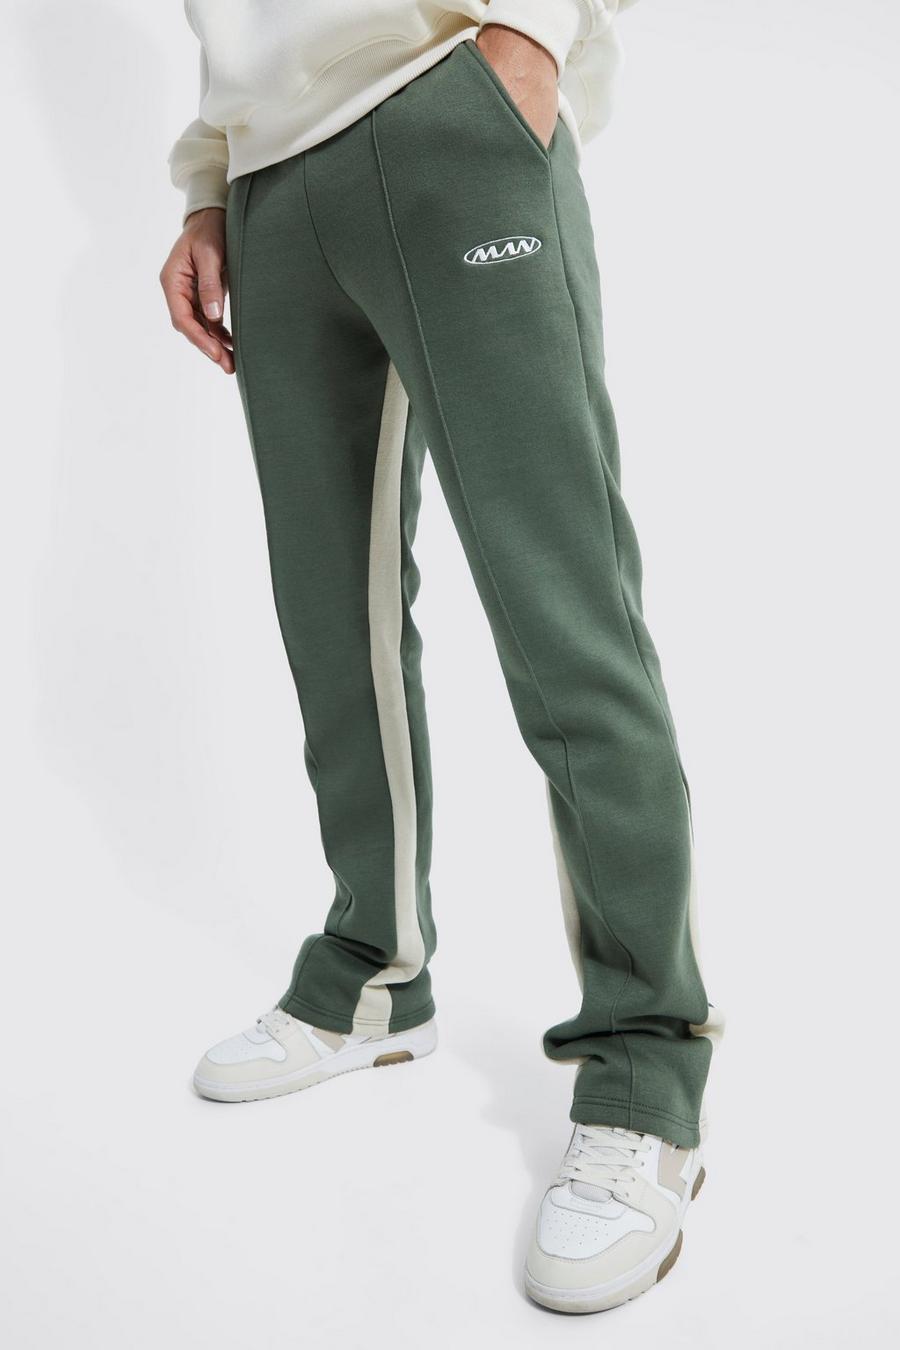 Khaki Tall Stacked Flare Contrast Gusset Jogger 